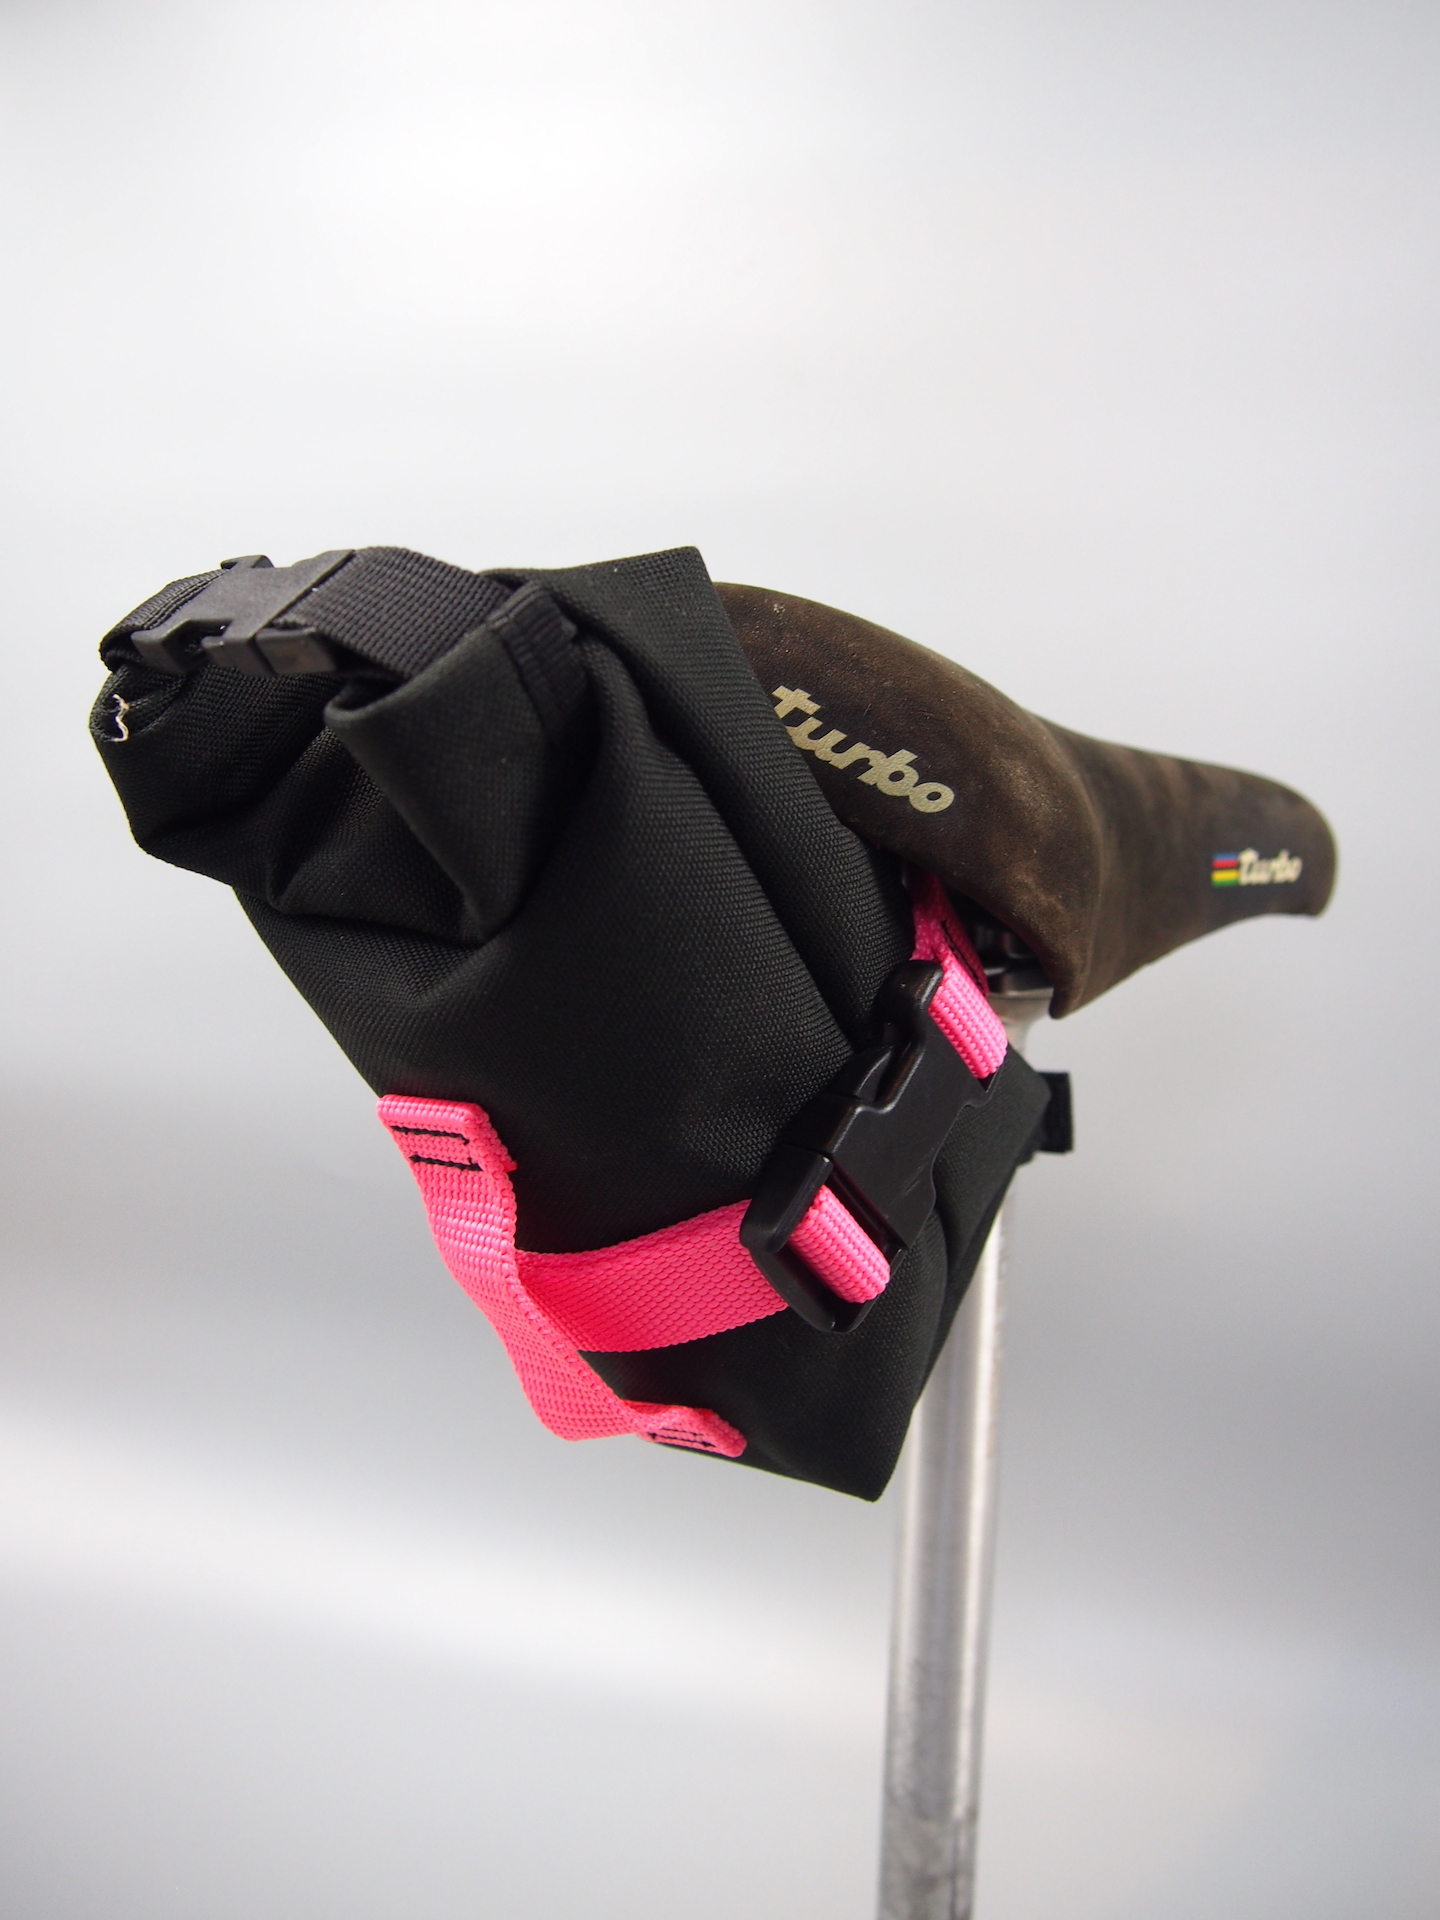 Handmade compact roll-top seat pack – Black & neon pink